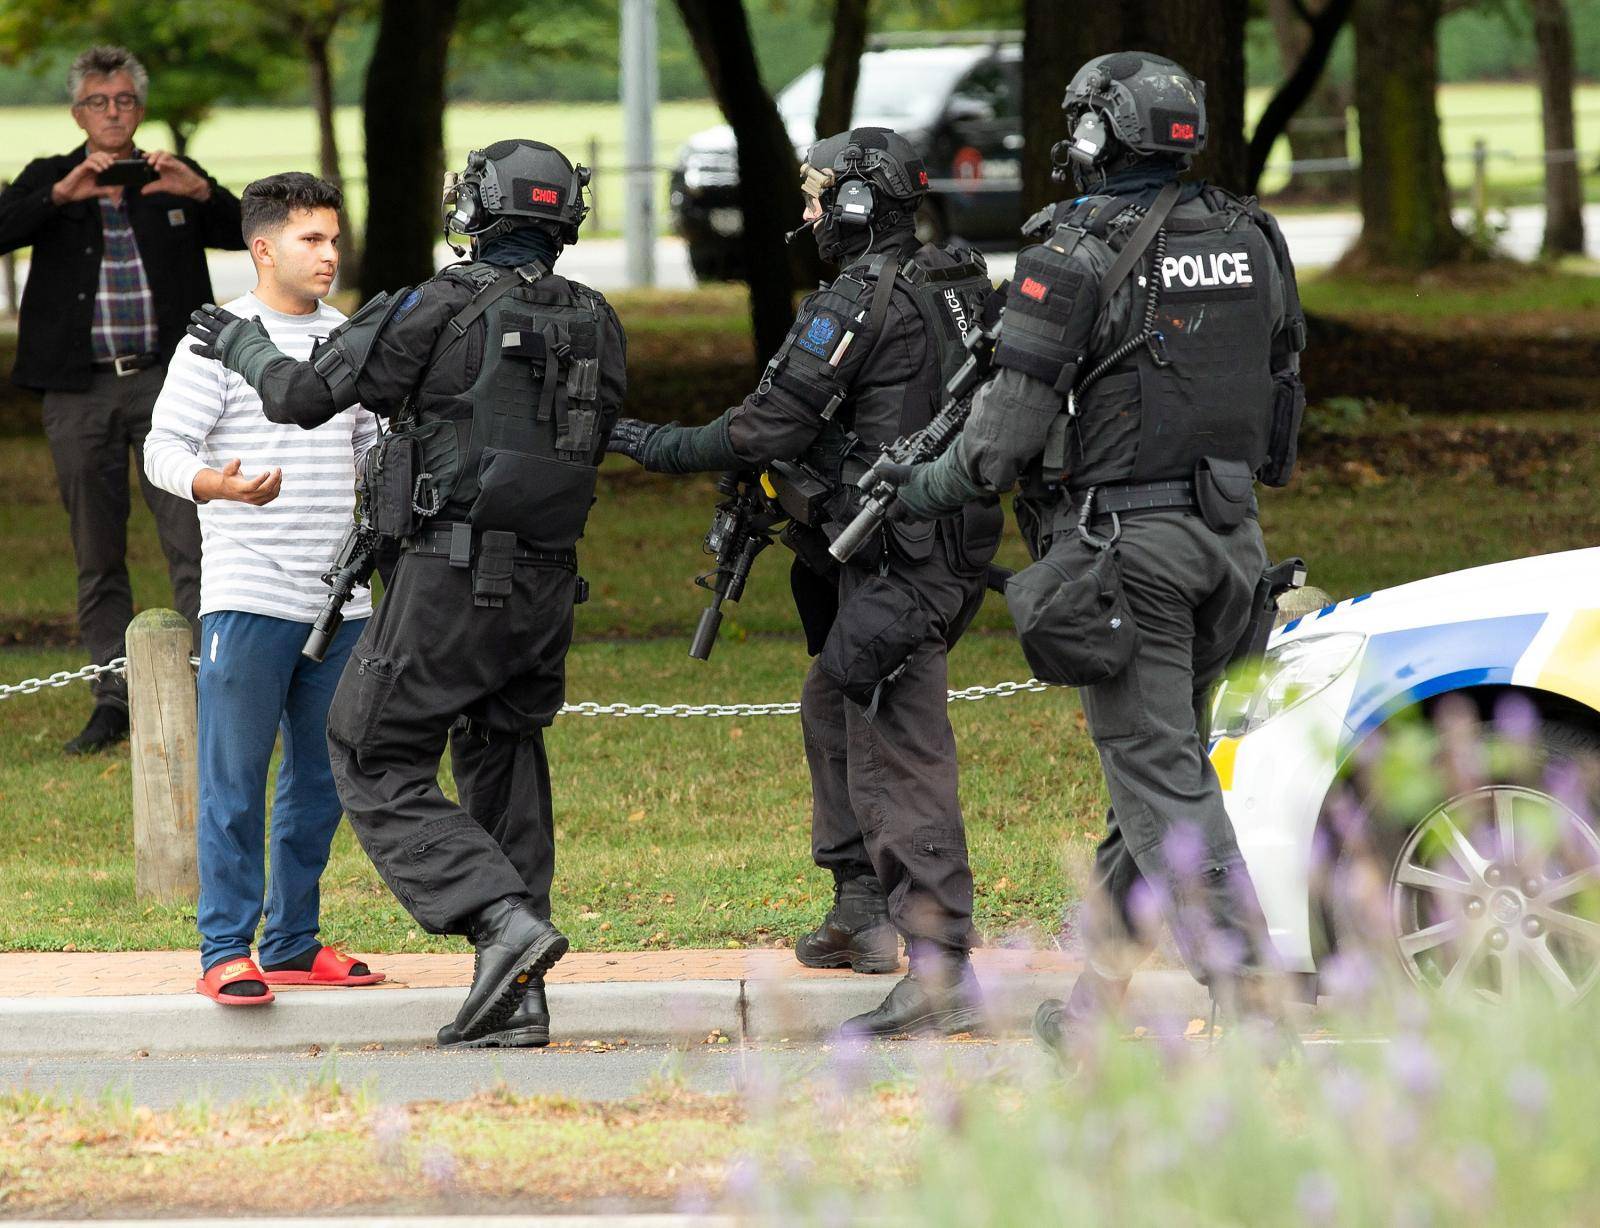 AOS (Armed Offenders Squad) push back members of the public following a shooting at the Masjid Al Noor mosque in Christchurch